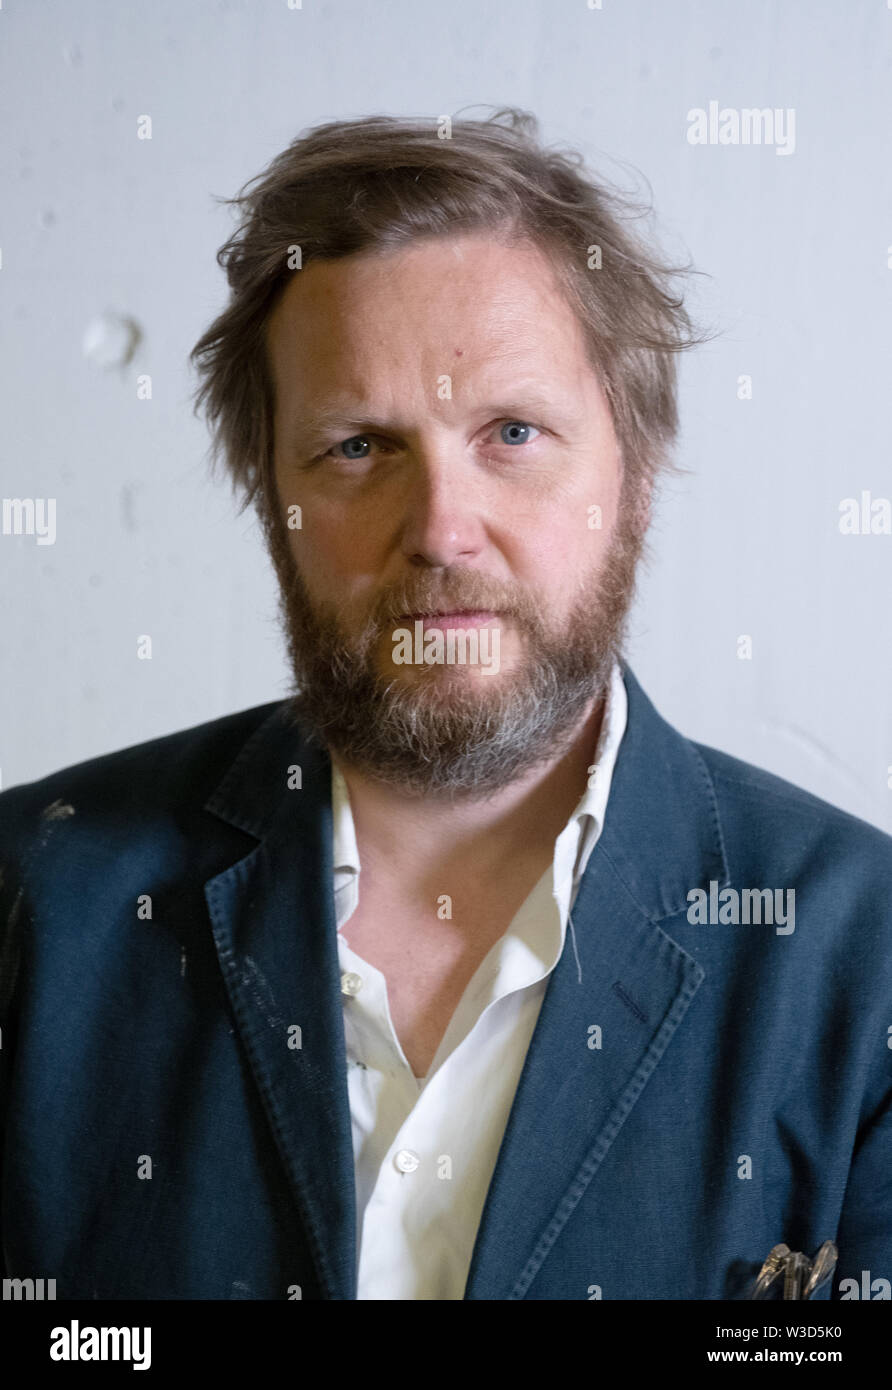 Stuttgart, Germany. 12th July, 2019. Ragnar Kjartansson, performance artist from Iceland, photographed in the rooms of the Kunstmuseum before the beginning of his exhibition with the title: 'Scheize - Liebe - Sehnsucht'. Credit: Bernd Weißbrod/dpa/Alamy Live News Stock Photo